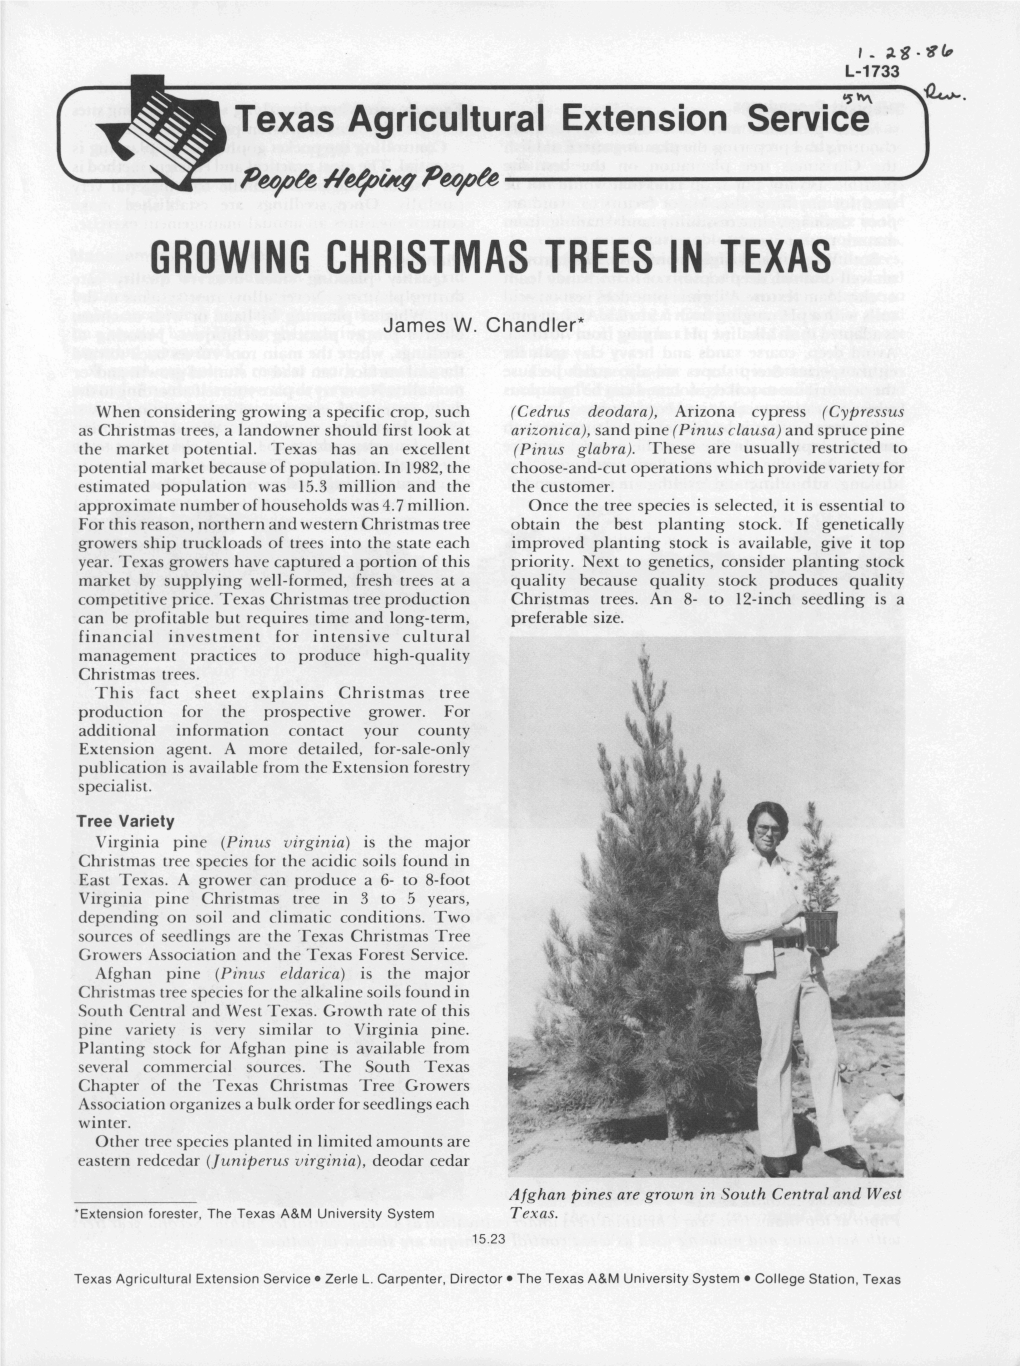 Growing Christmas Trees in Texas